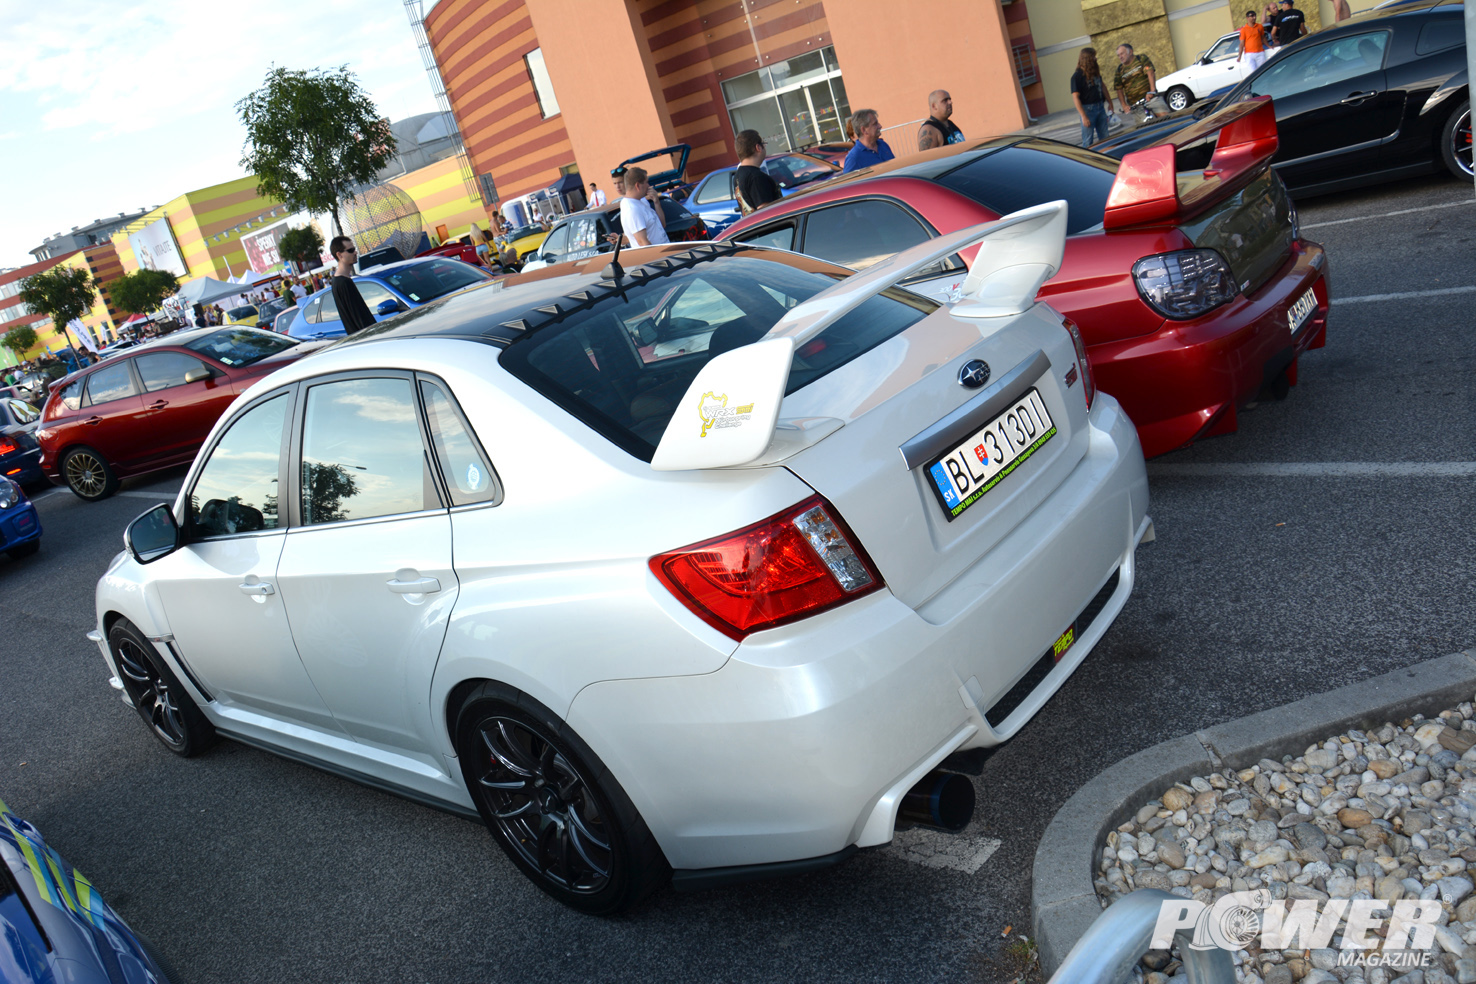 Power Tuning party